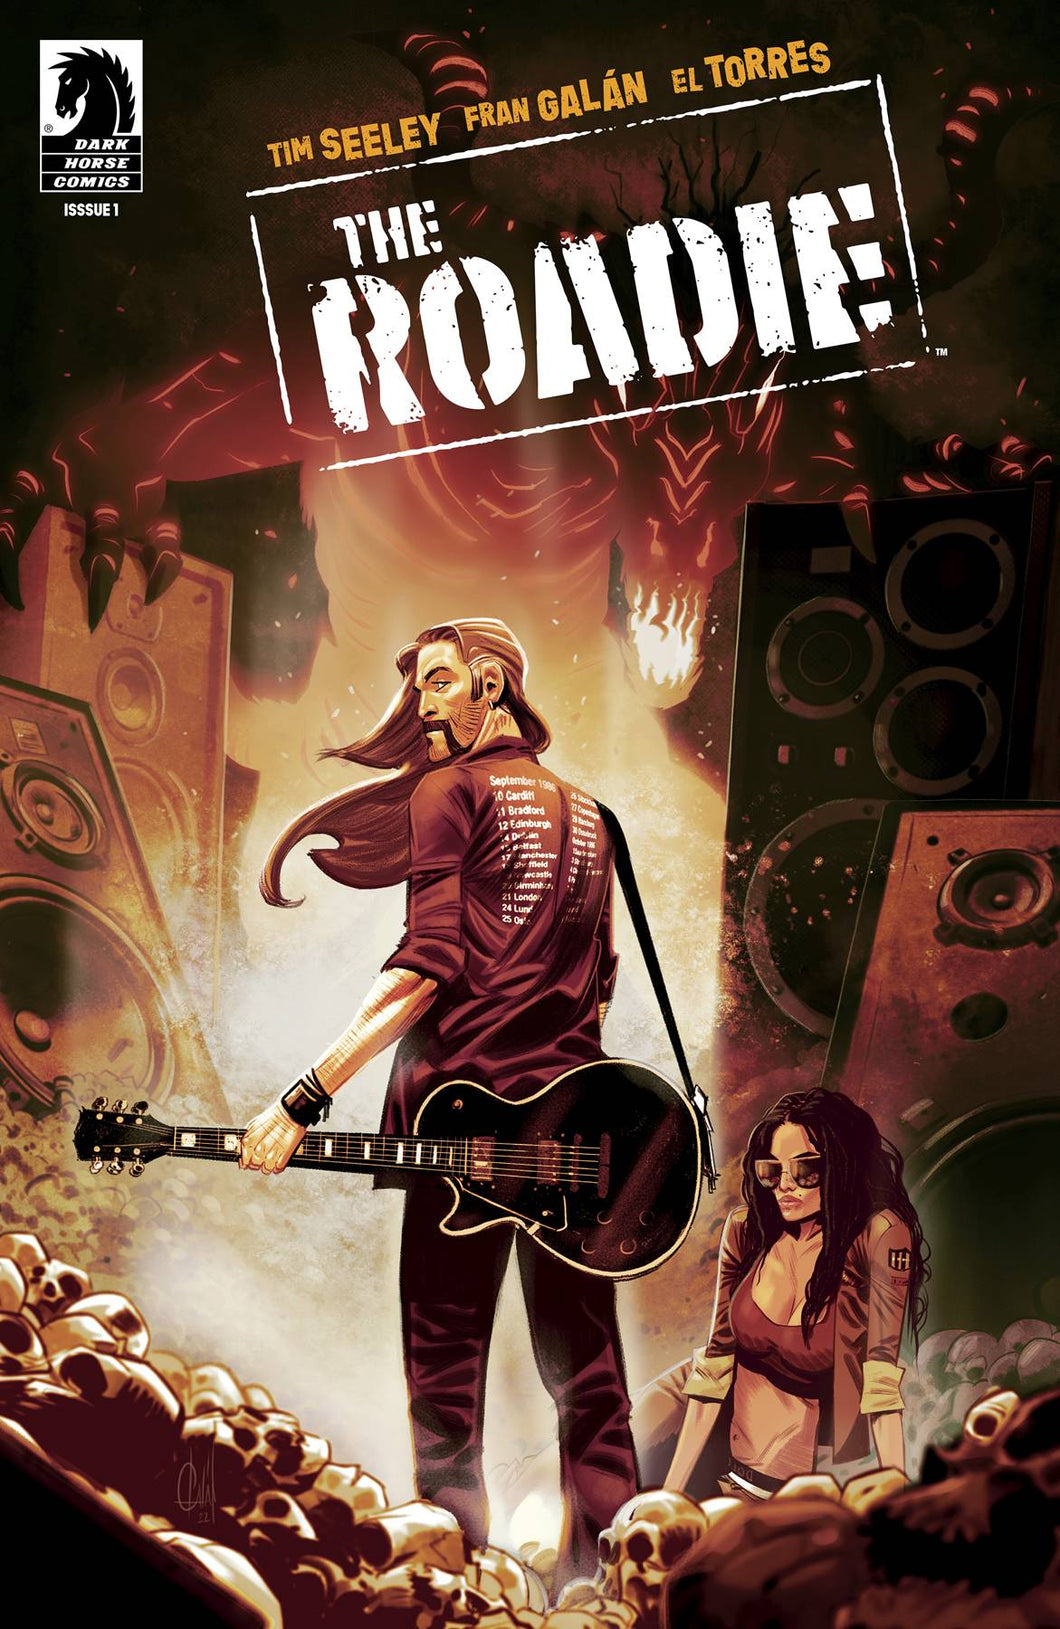 The Roadie #1 (Cover A - Galan)